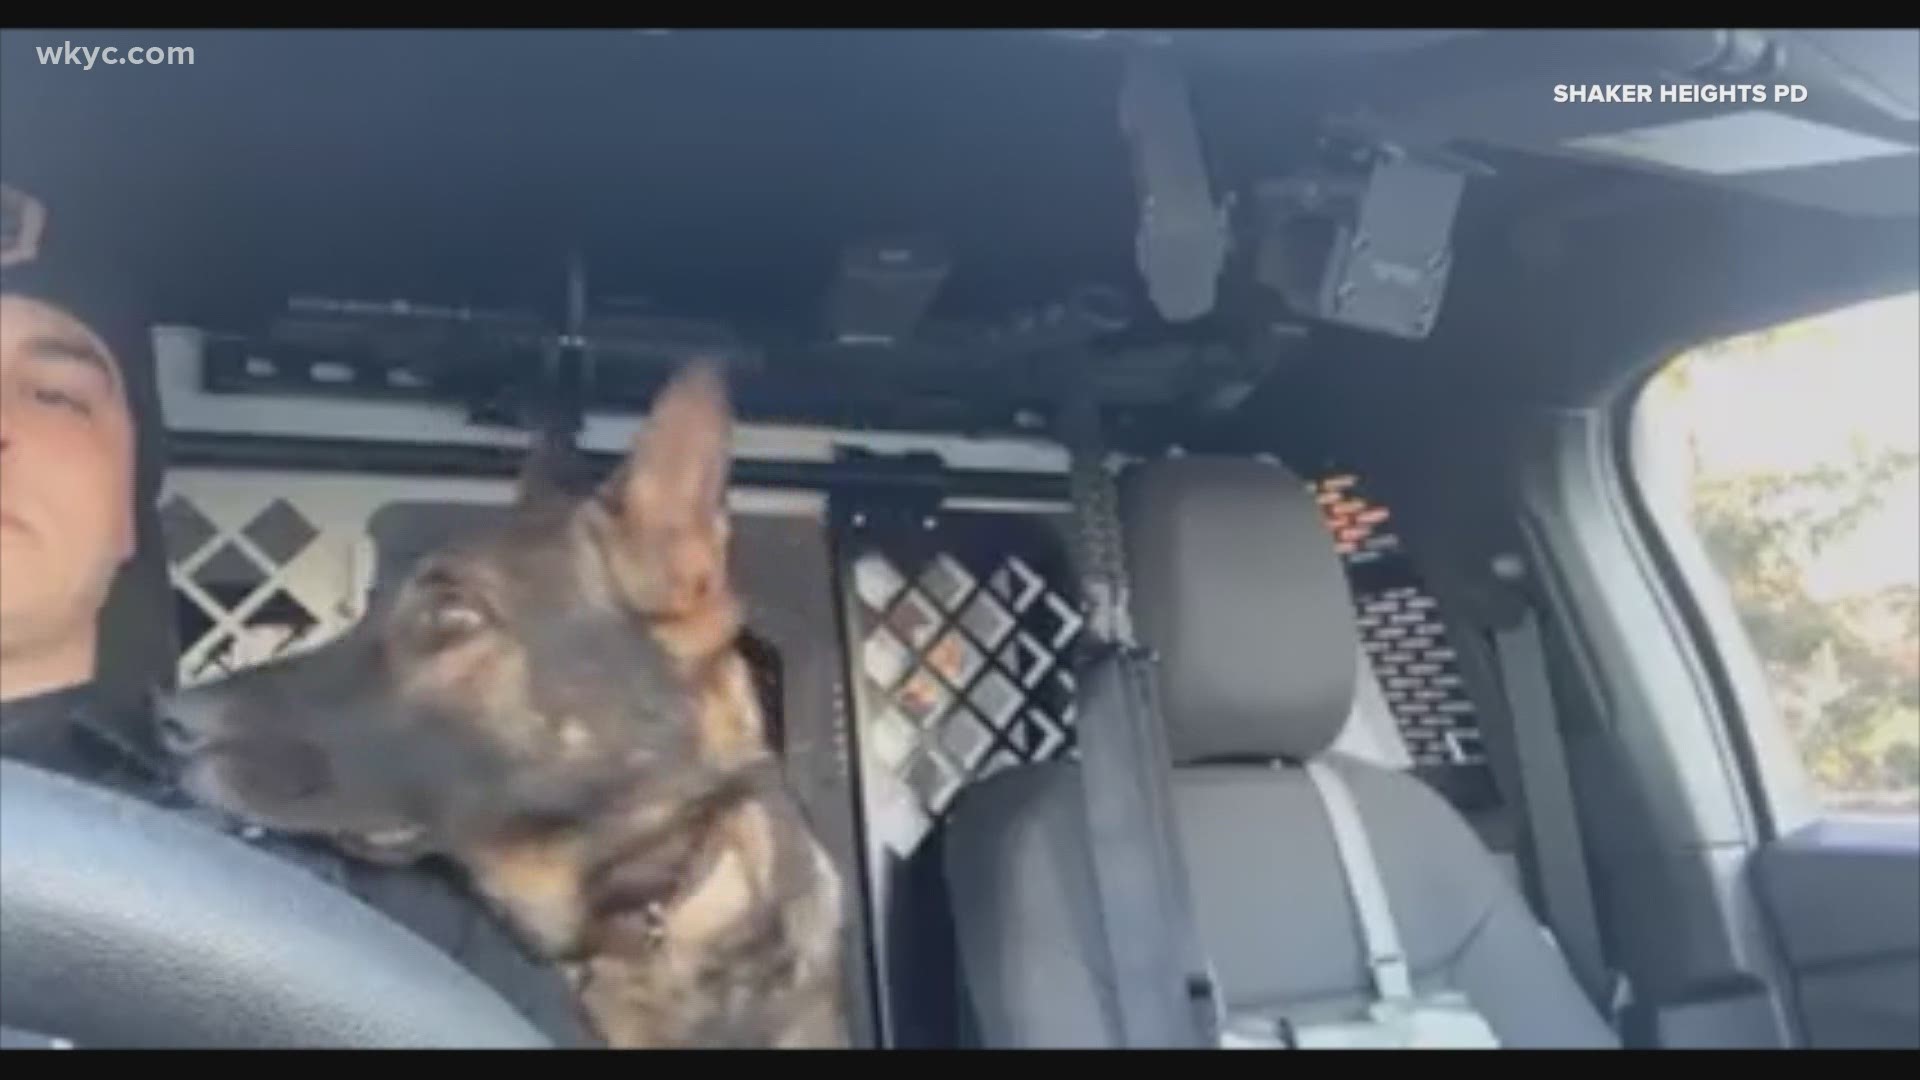 It is time for our worth the watch video of the day.  Igor, one of the Shaker Heights' K9's loves country music.  He loves to sing with Eric Church.  Take a listen.